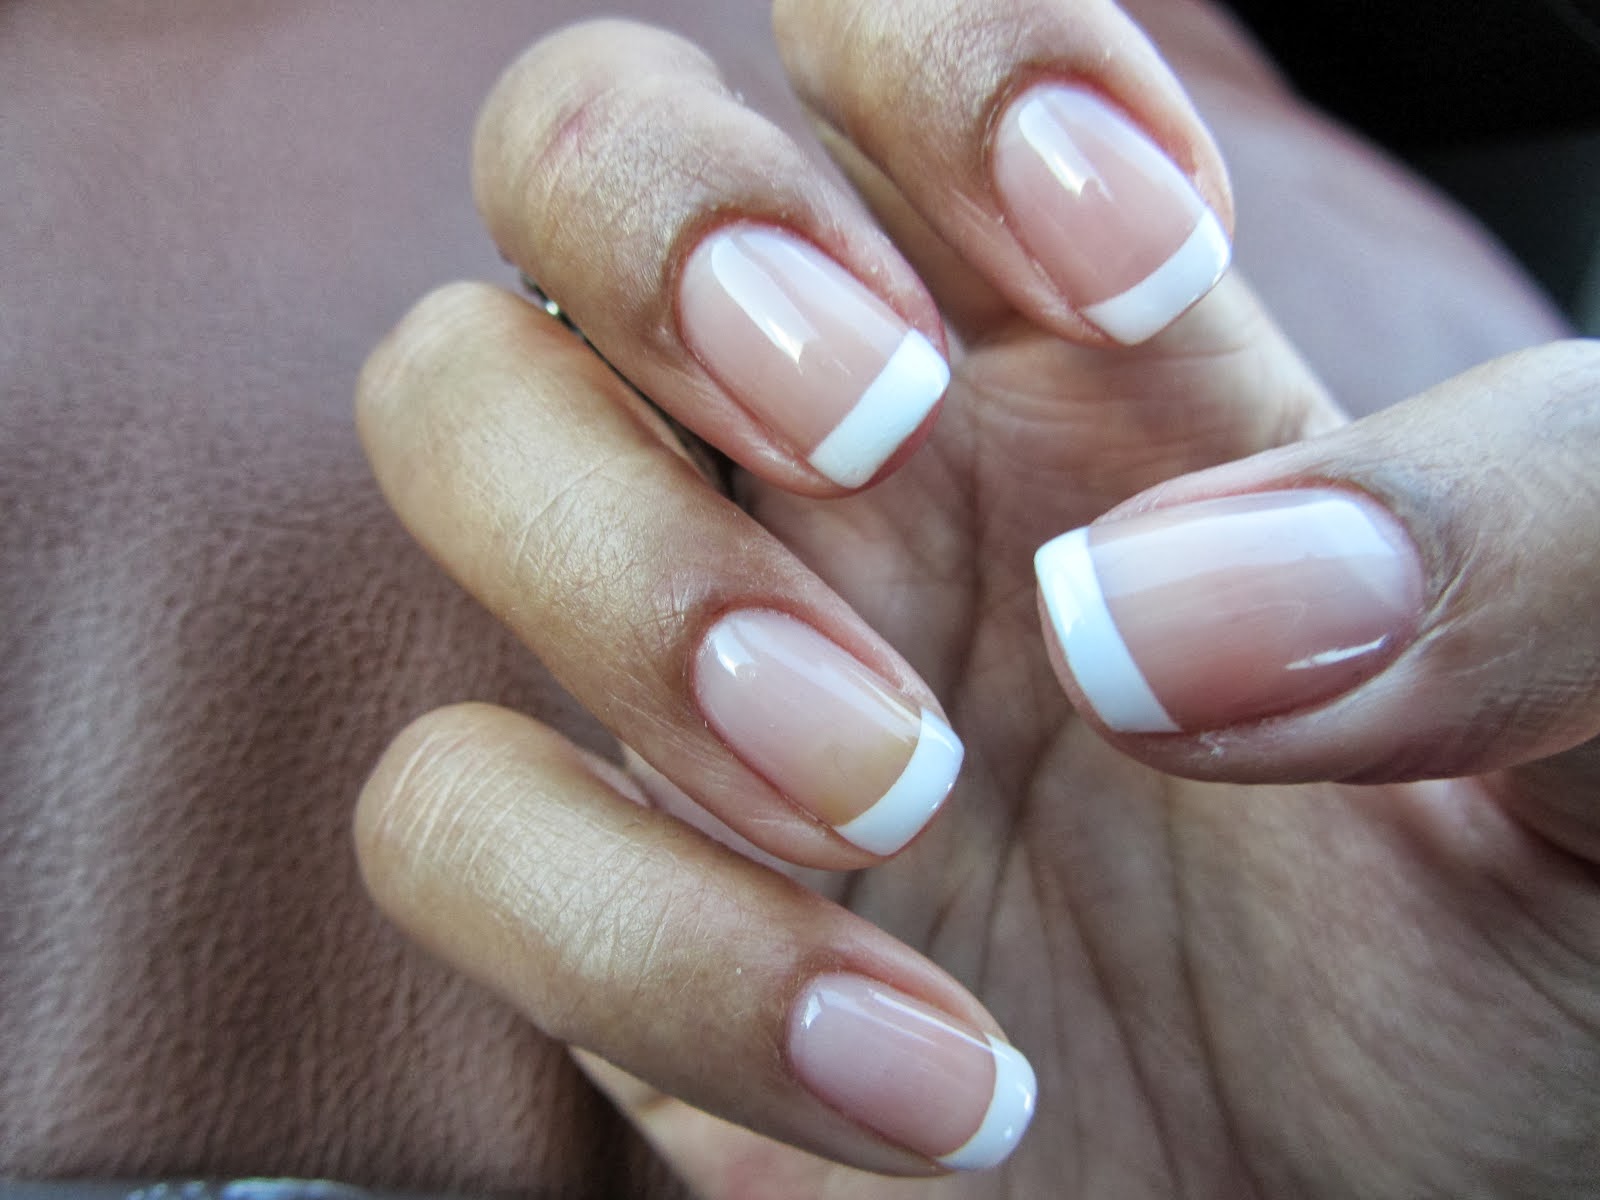 3. Trendy Gel Nail Designs for Growing Out Nails - wide 3